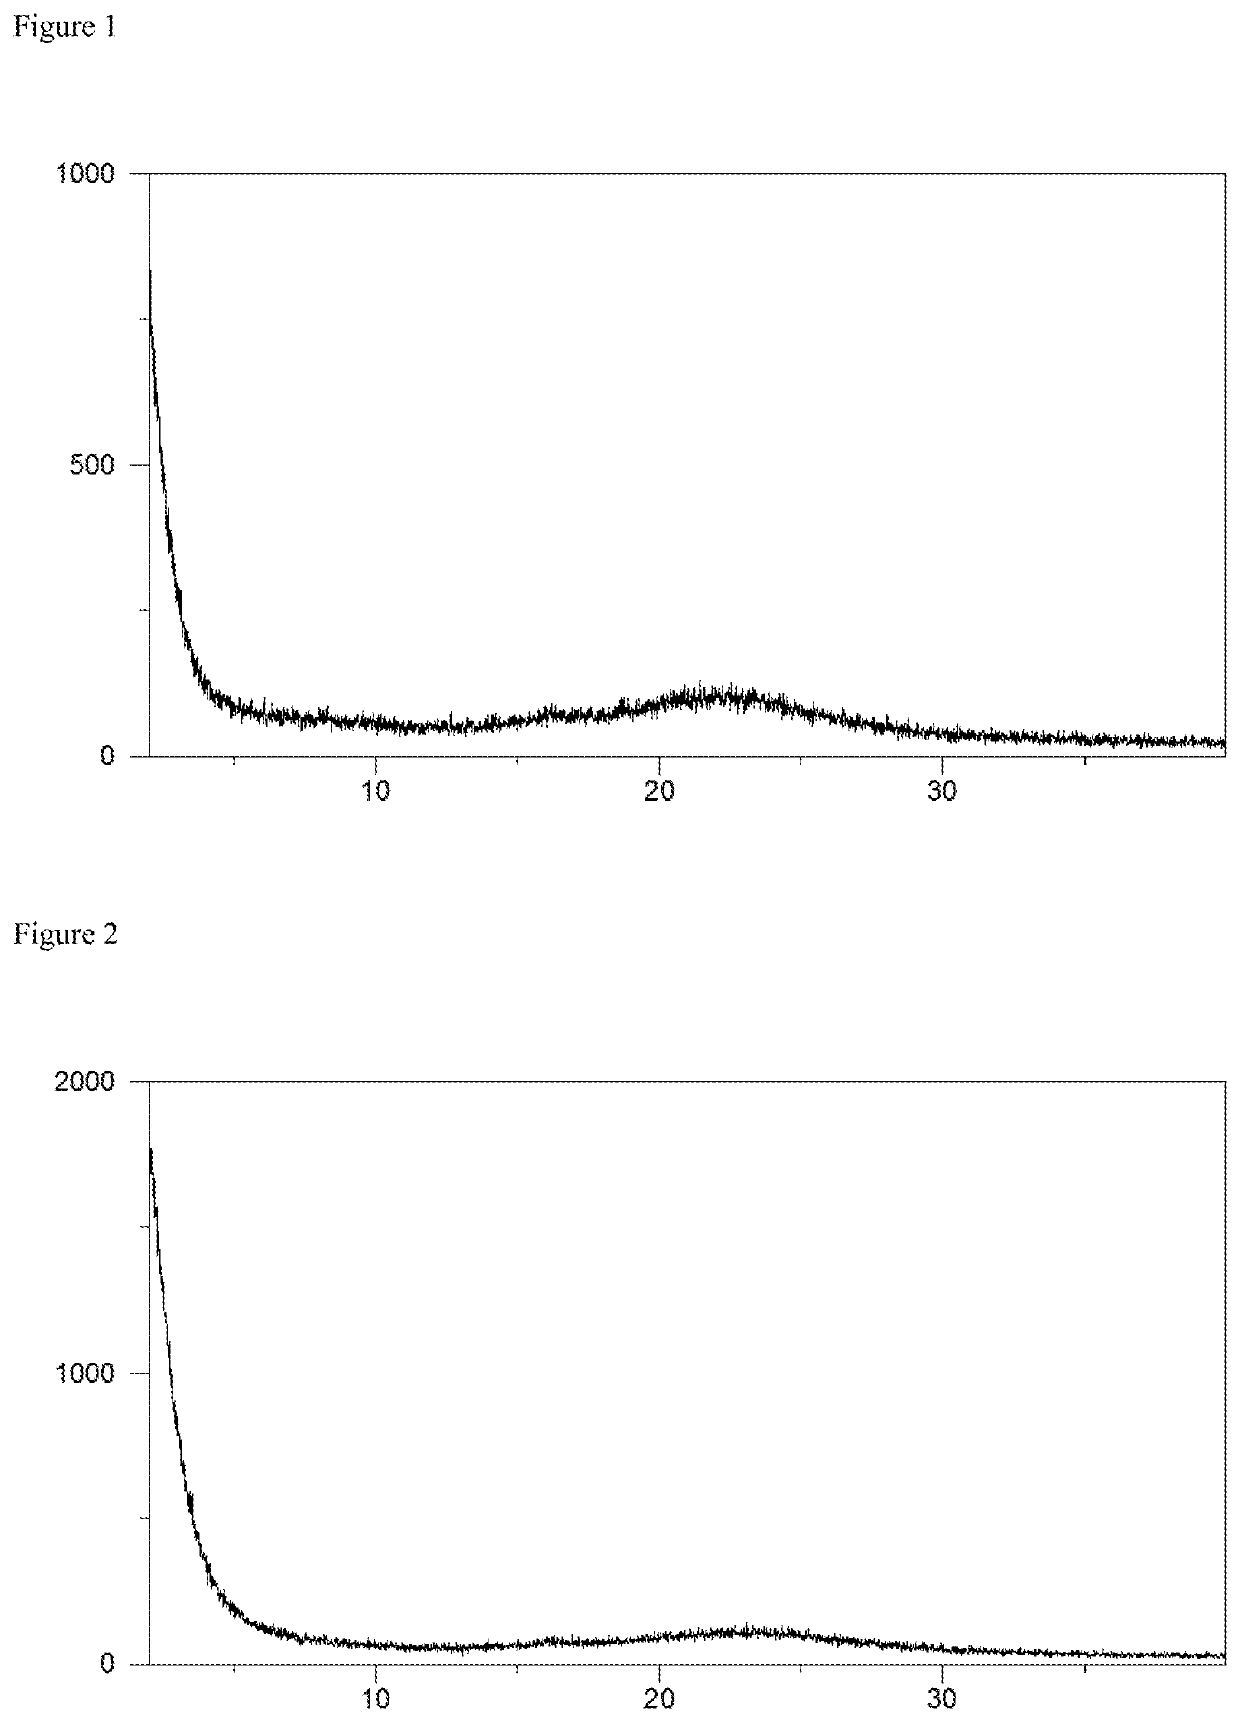 Amorphous solid dispersion of an orally available gonadotropin-releasing hormone receptor antagonist